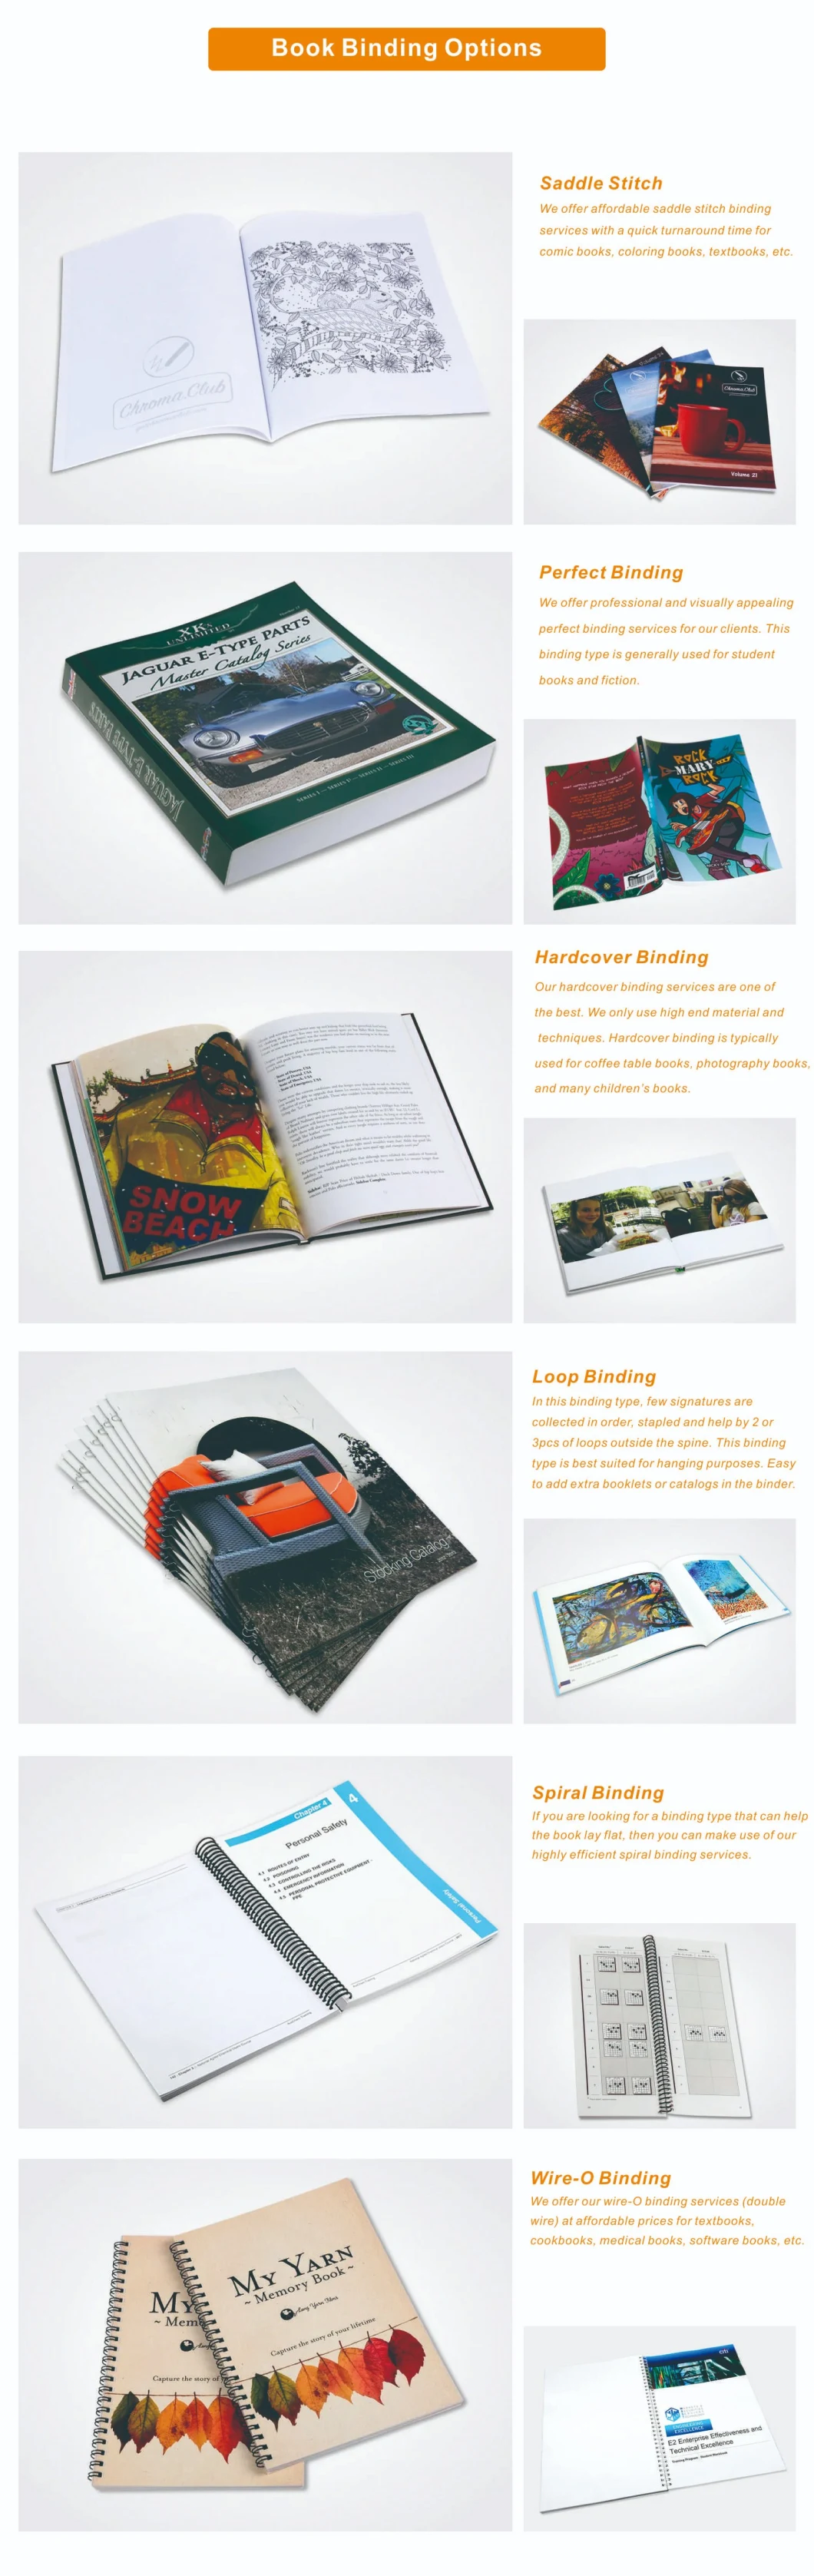 Full Service Book Printing in China Every Step of The Way